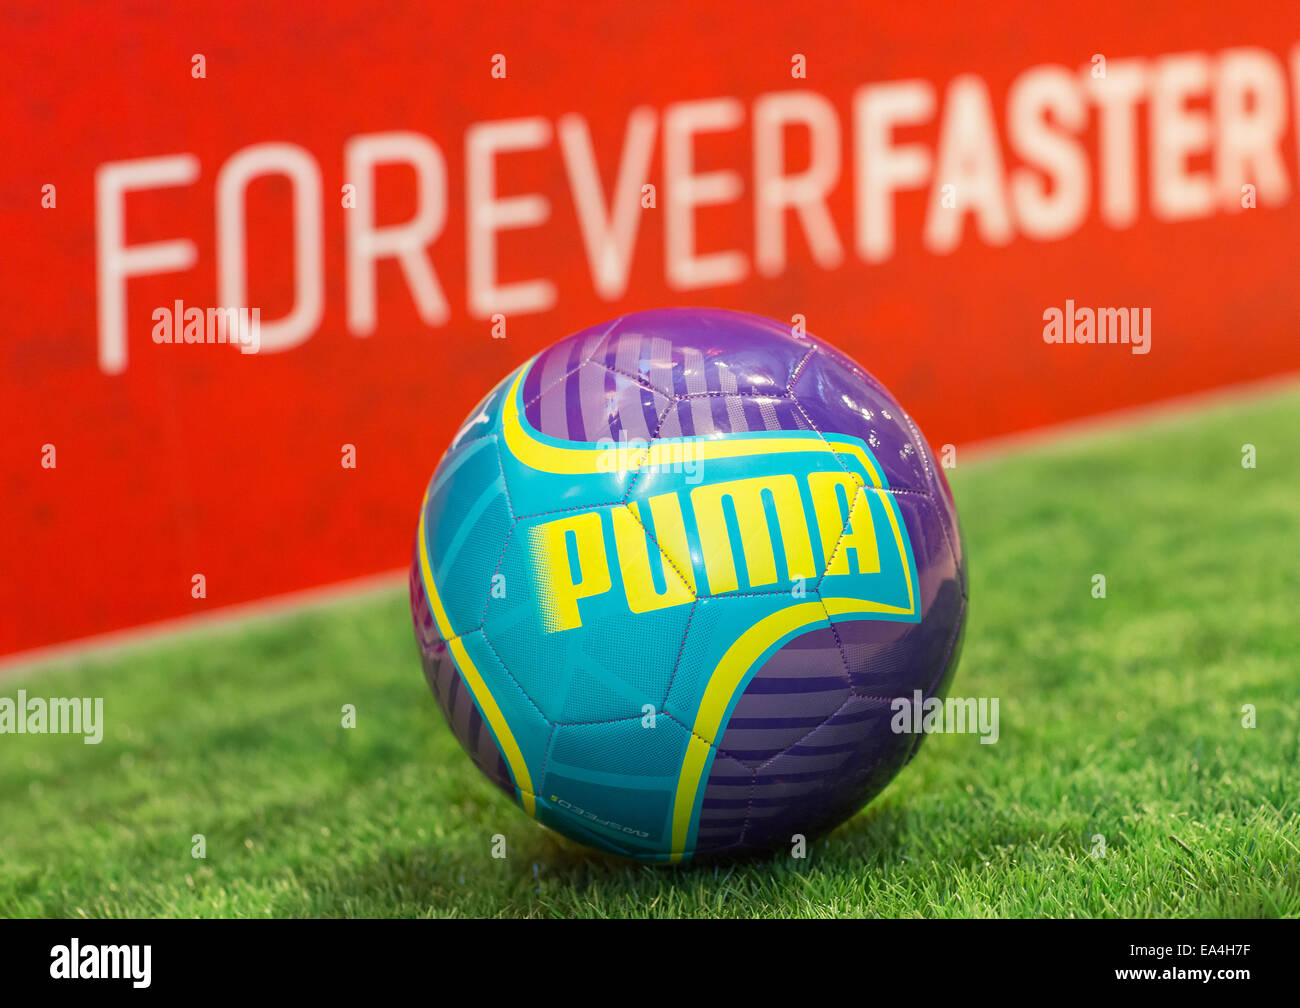 A PUMA football evoSPEED lying on the grass with Forever Faster slogan in  the background. COMMERCIAL HANDOUT/EDITORIAL USE ONLY/NO SALES. Please  quote the source 